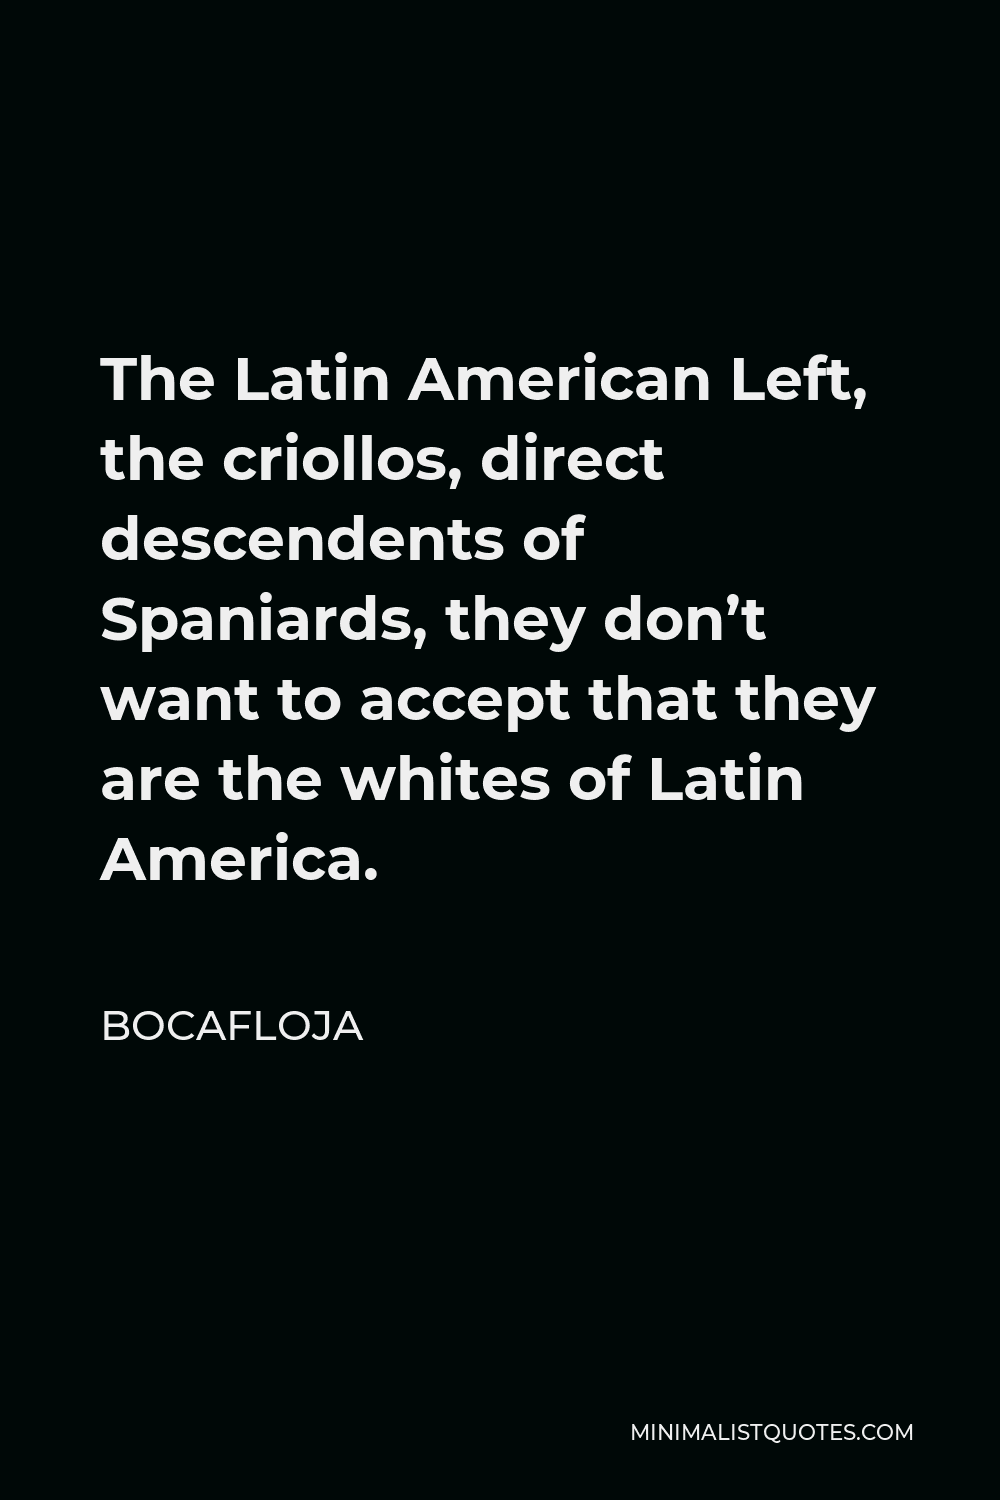 Bocafloja Quote - The Latin American Left, the criollos, direct descendents of Spaniards, they don’t want to accept that they are the whites of Latin America.